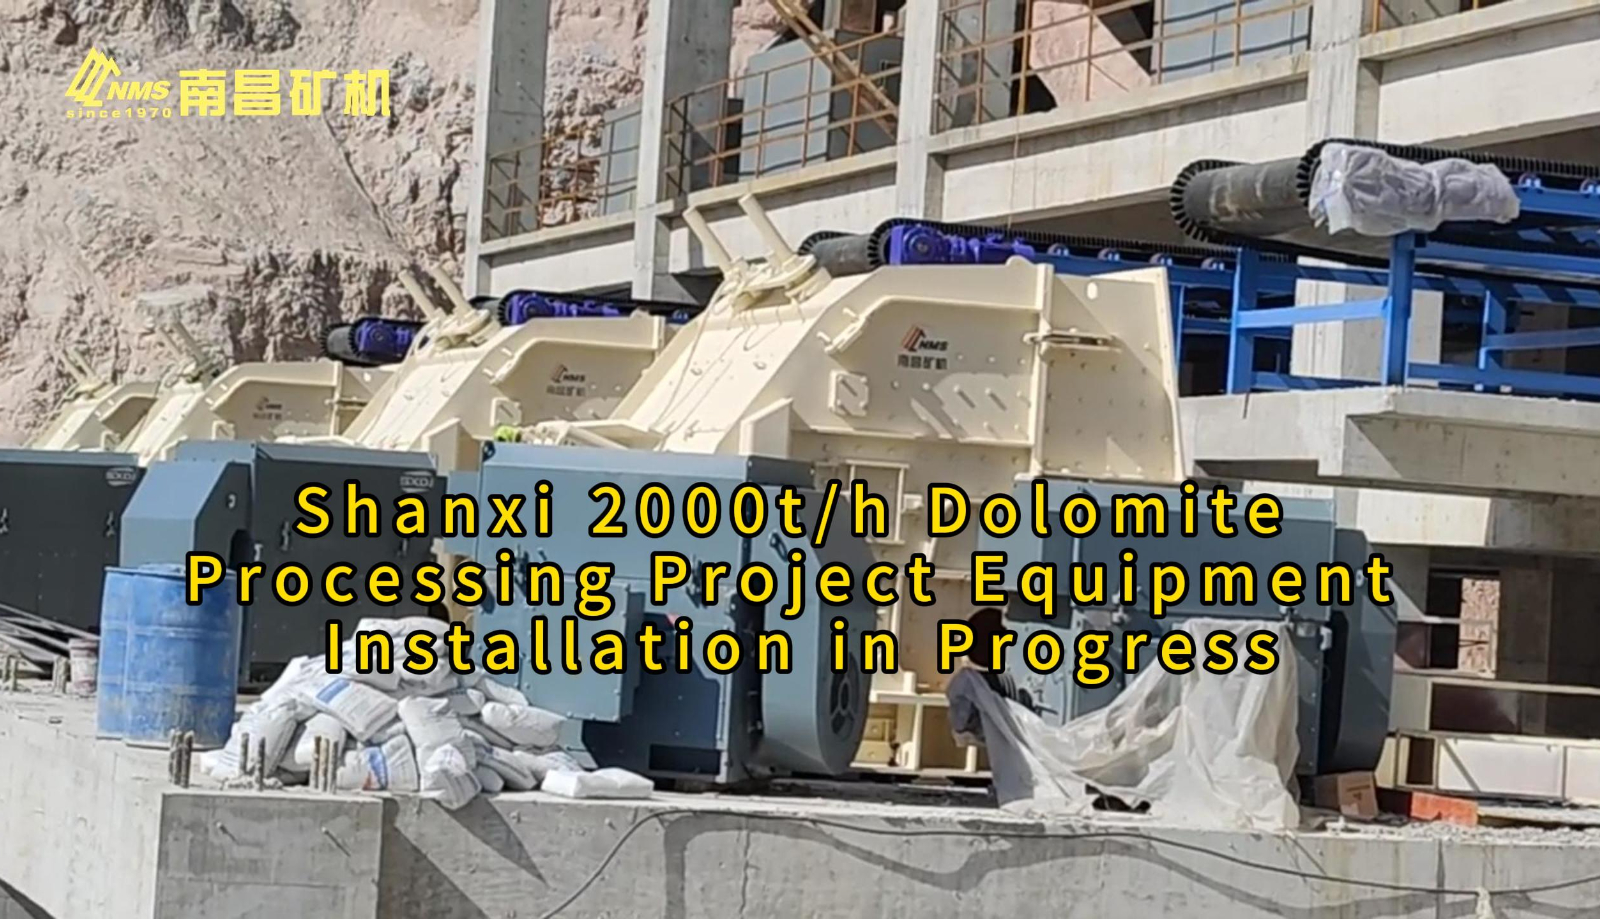 Shanxi 2000t/h Dolomite Processing Project Equipment Installation in Progress